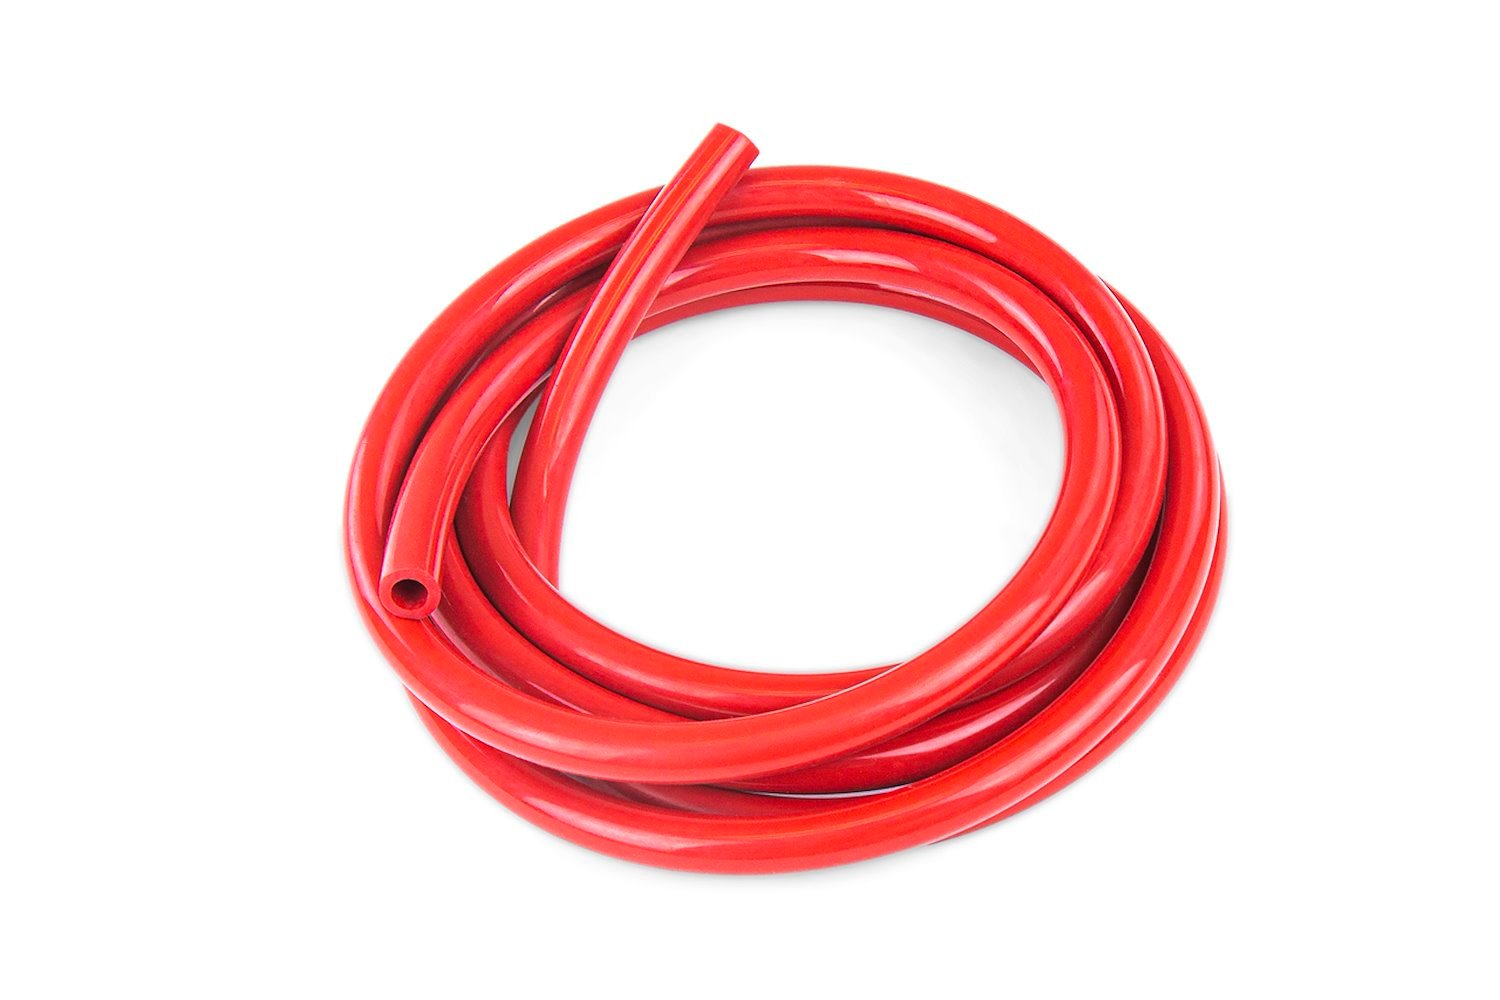 HTSVH95-REDx10 High-Temperature Silicone Vacuum Hose Tubing, 3/8 in. ID, 10 ft. Roll, Red